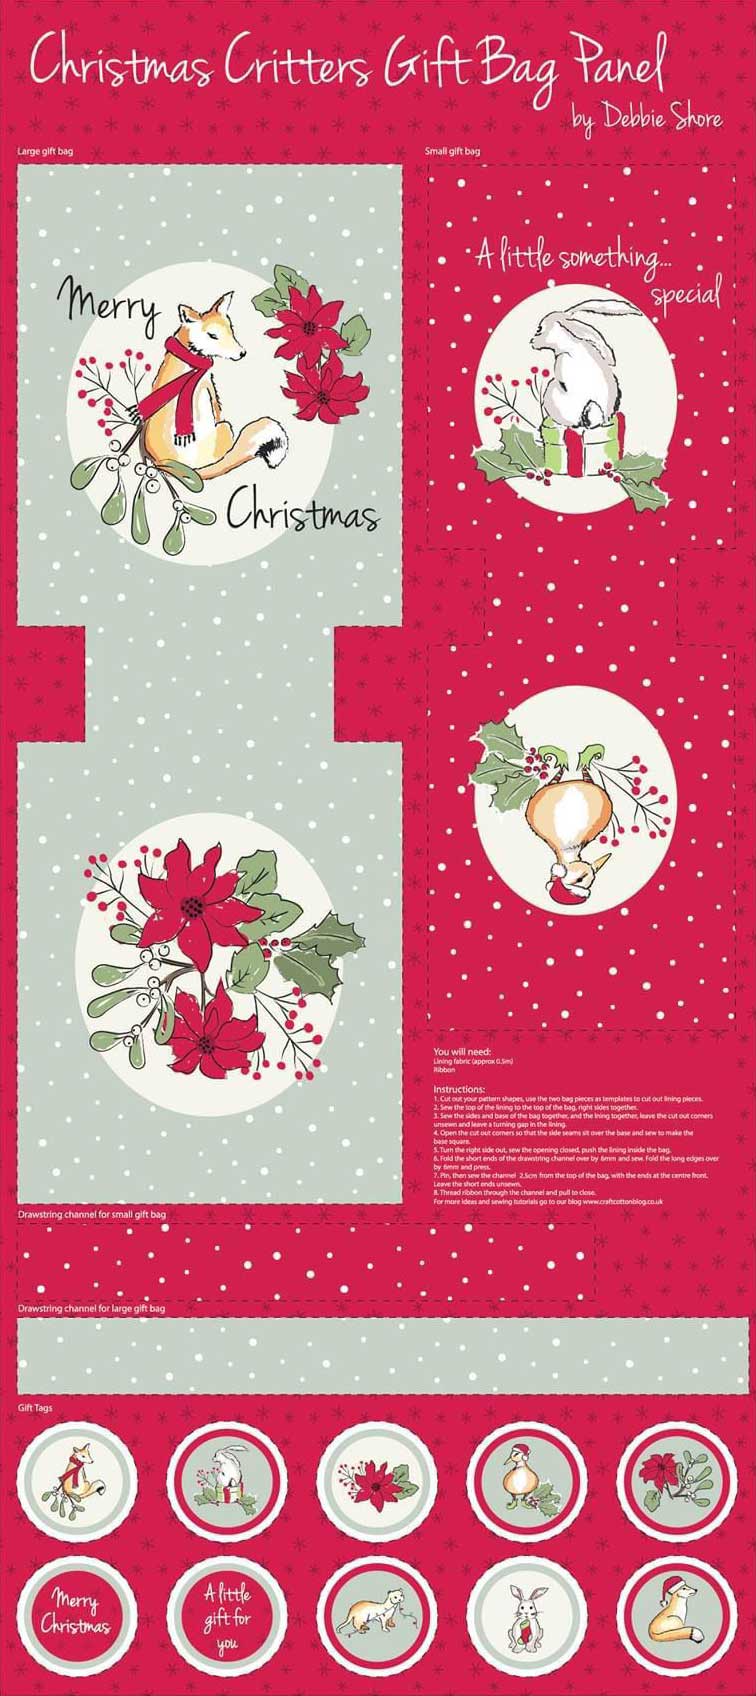 Quilting Fabric Panel - Christmas Critters Gift Bag Panel by Debbie Shore for The Craft Cotton Co.